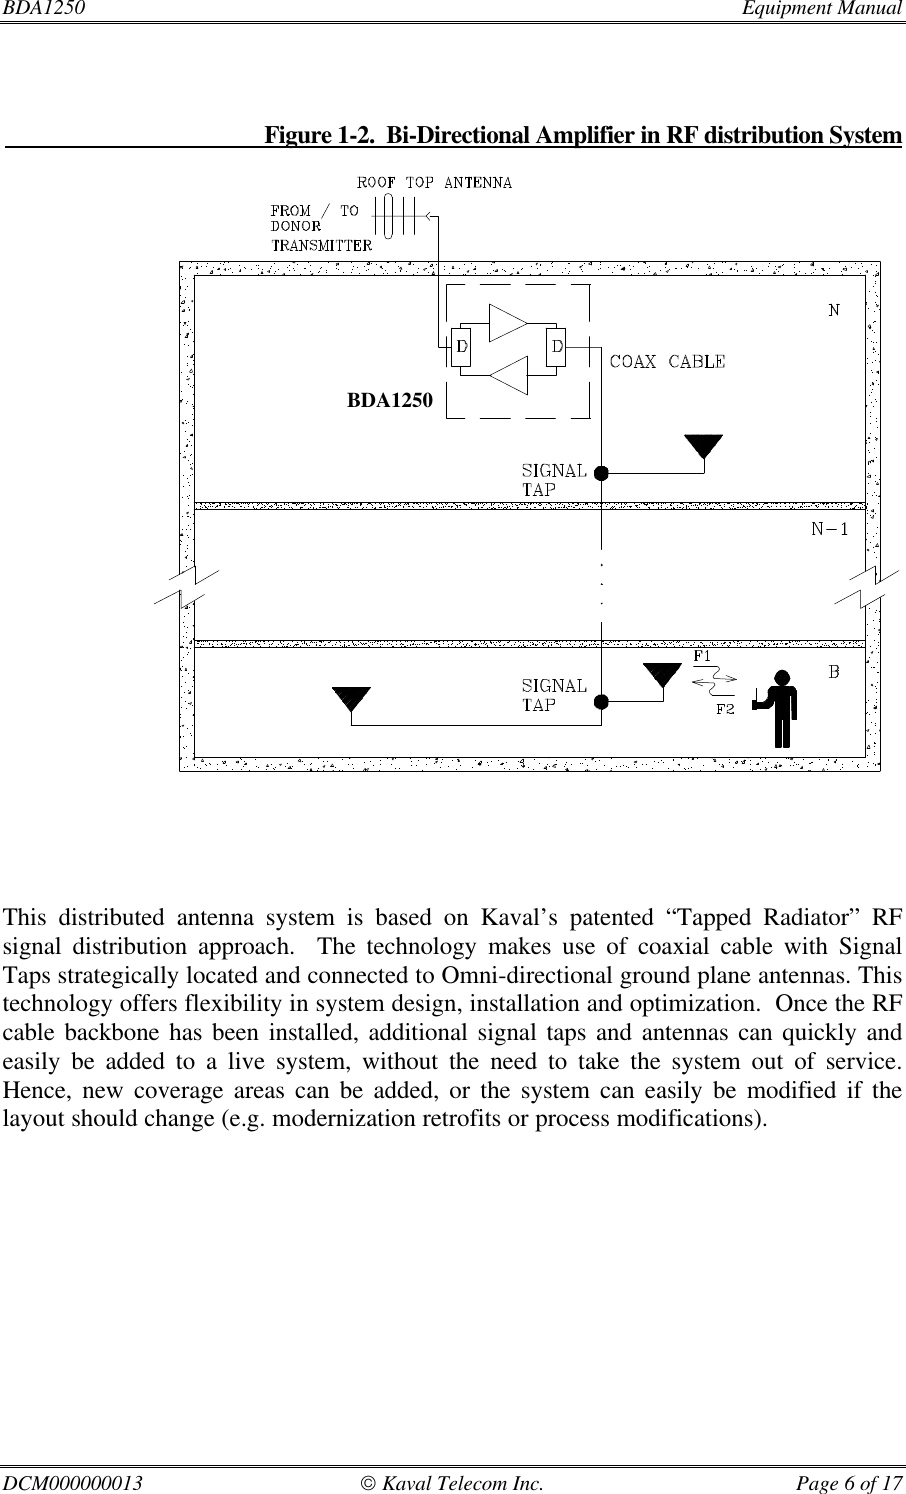 BDA1250  Equipment ManualDCM000000013  Kaval Telecom Inc. Page 6 of 17                                             Figure 1-2.  Bi-Directional Amplifier in RF distribution SystemThis distributed antenna system is based on Kaval’s patented “Tapped Radiator” RFsignal distribution approach.  The technology makes use of coaxial cable with SignalTaps strategically located and connected to Omni-directional ground plane antennas. Thistechnology offers flexibility in system design, installation and optimization.  Once the RFcable backbone has been installed, additional signal taps and antennas can quickly andeasily be added to a live system, without the need to take the system out of service.Hence, new coverage areas can be added, or the system can easily be modified if thelayout should change (e.g. modernization retrofits or process modifications).BDA1250